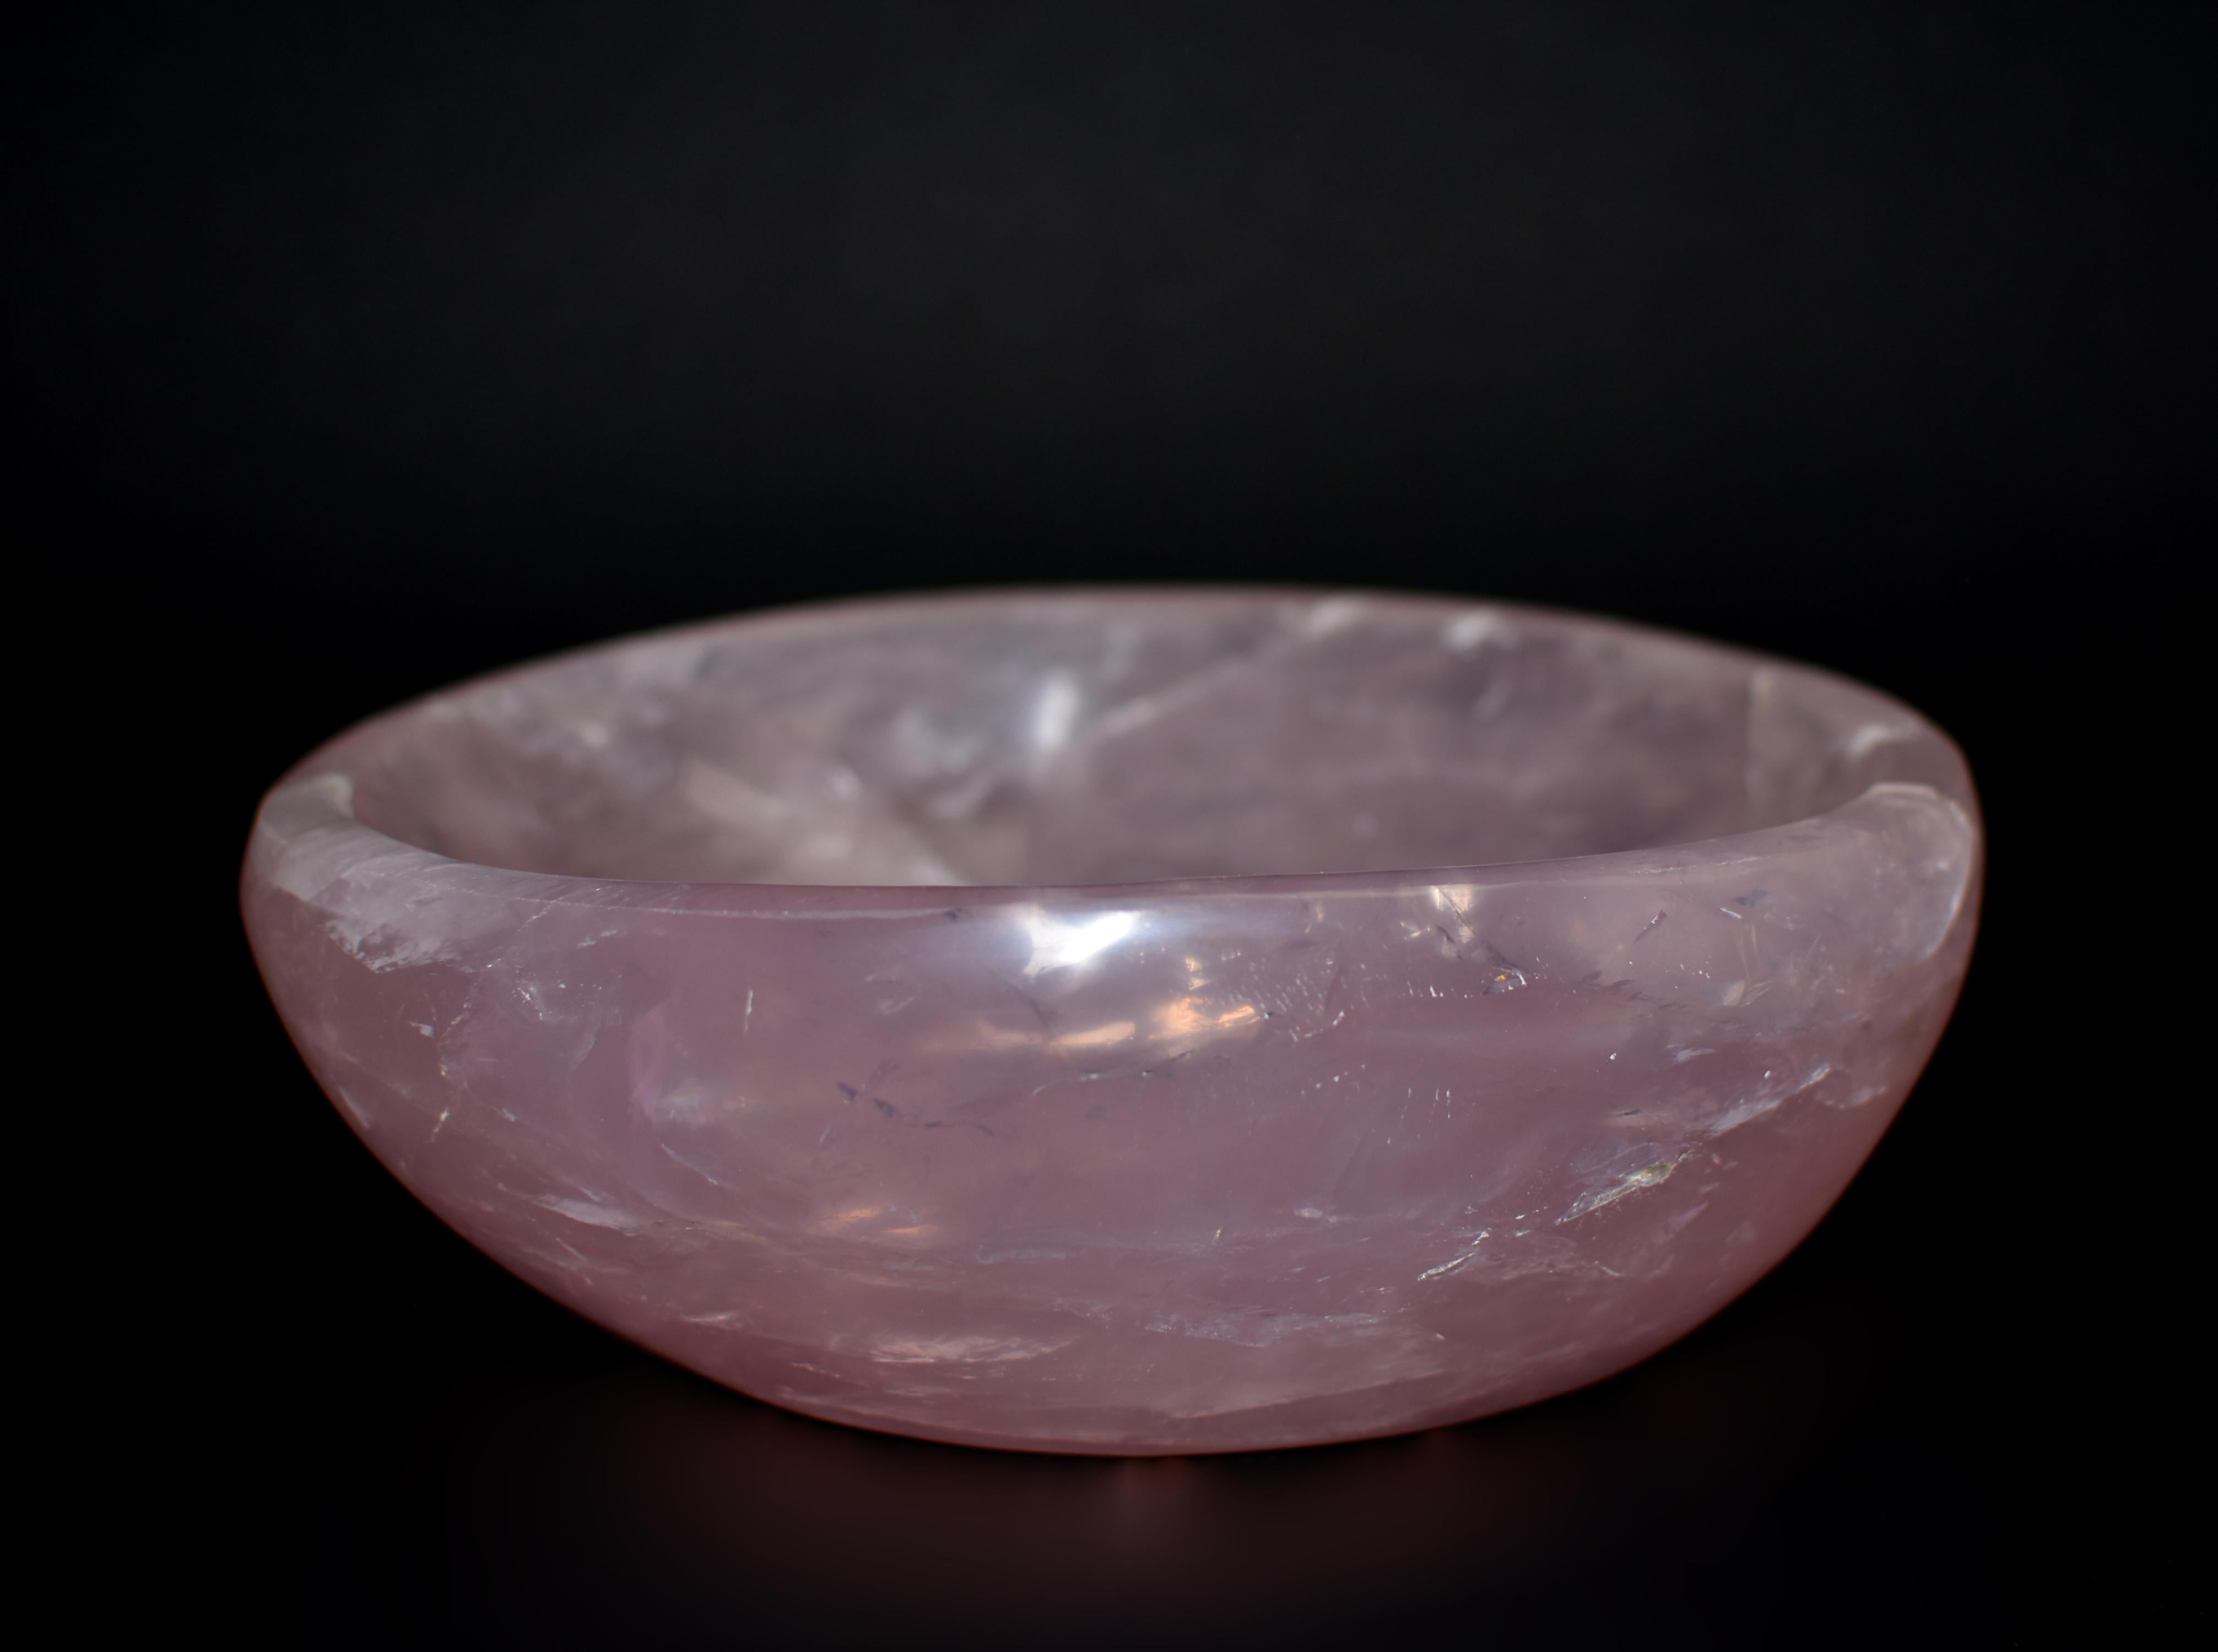 A beautiful large rose quartz bowl weighing 5.4 lbs. Of ovoid form with smooth edge and inside out, stone of the highest quality grade AAA rose quartz. All natural gemstone, hand crafted and polished. Stunning color and iridescence. Rose quartz is a